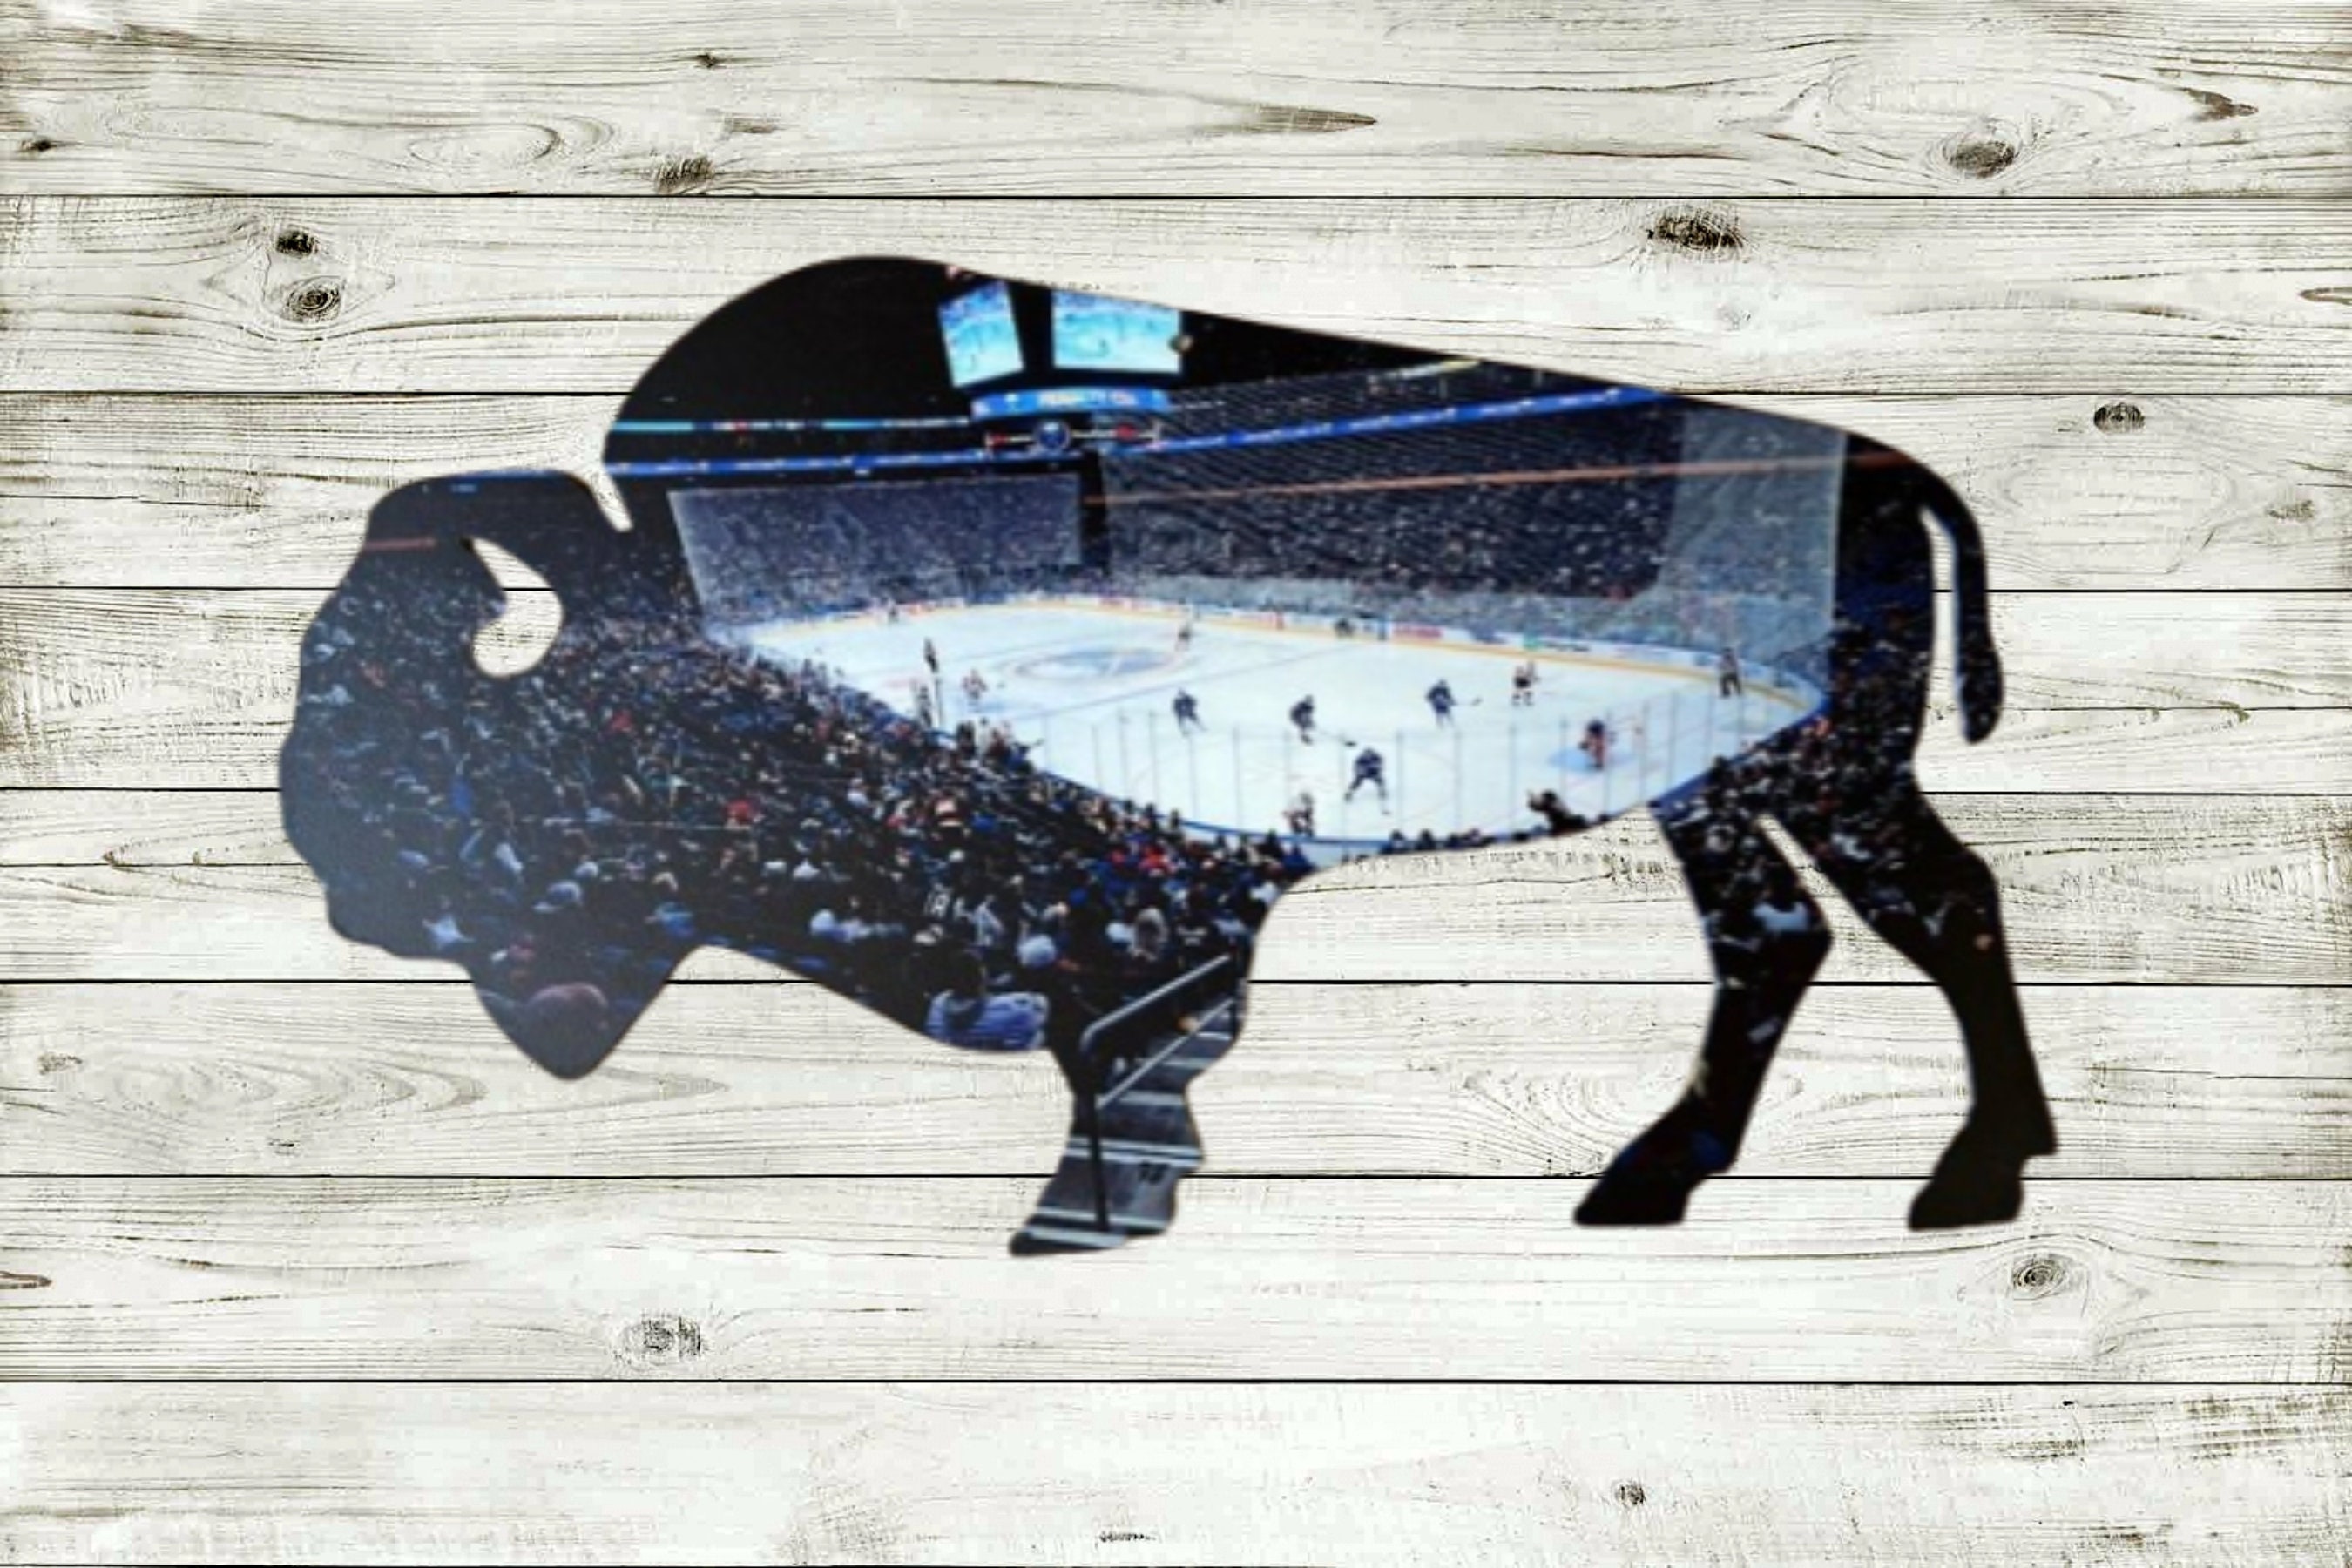 Vintage Buffalo Sabres Goat Head Flag Size: 36” by 26” $35 ❌SOLD❌